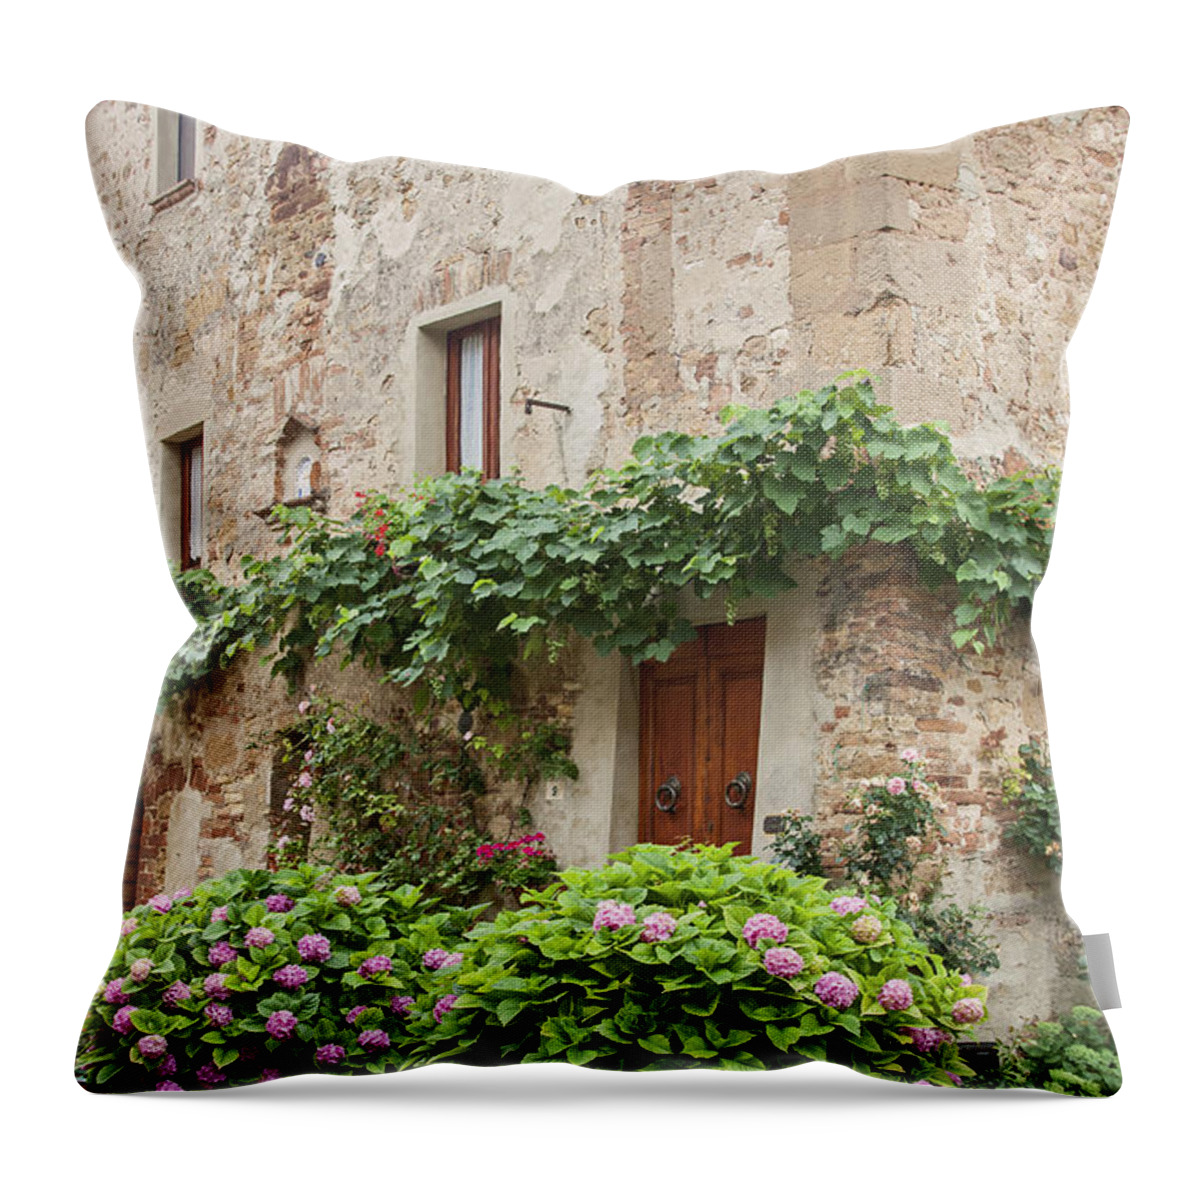 Old Stone House Throw Pillow featuring the photograph Potted Hydrangeas by Sally Weigand